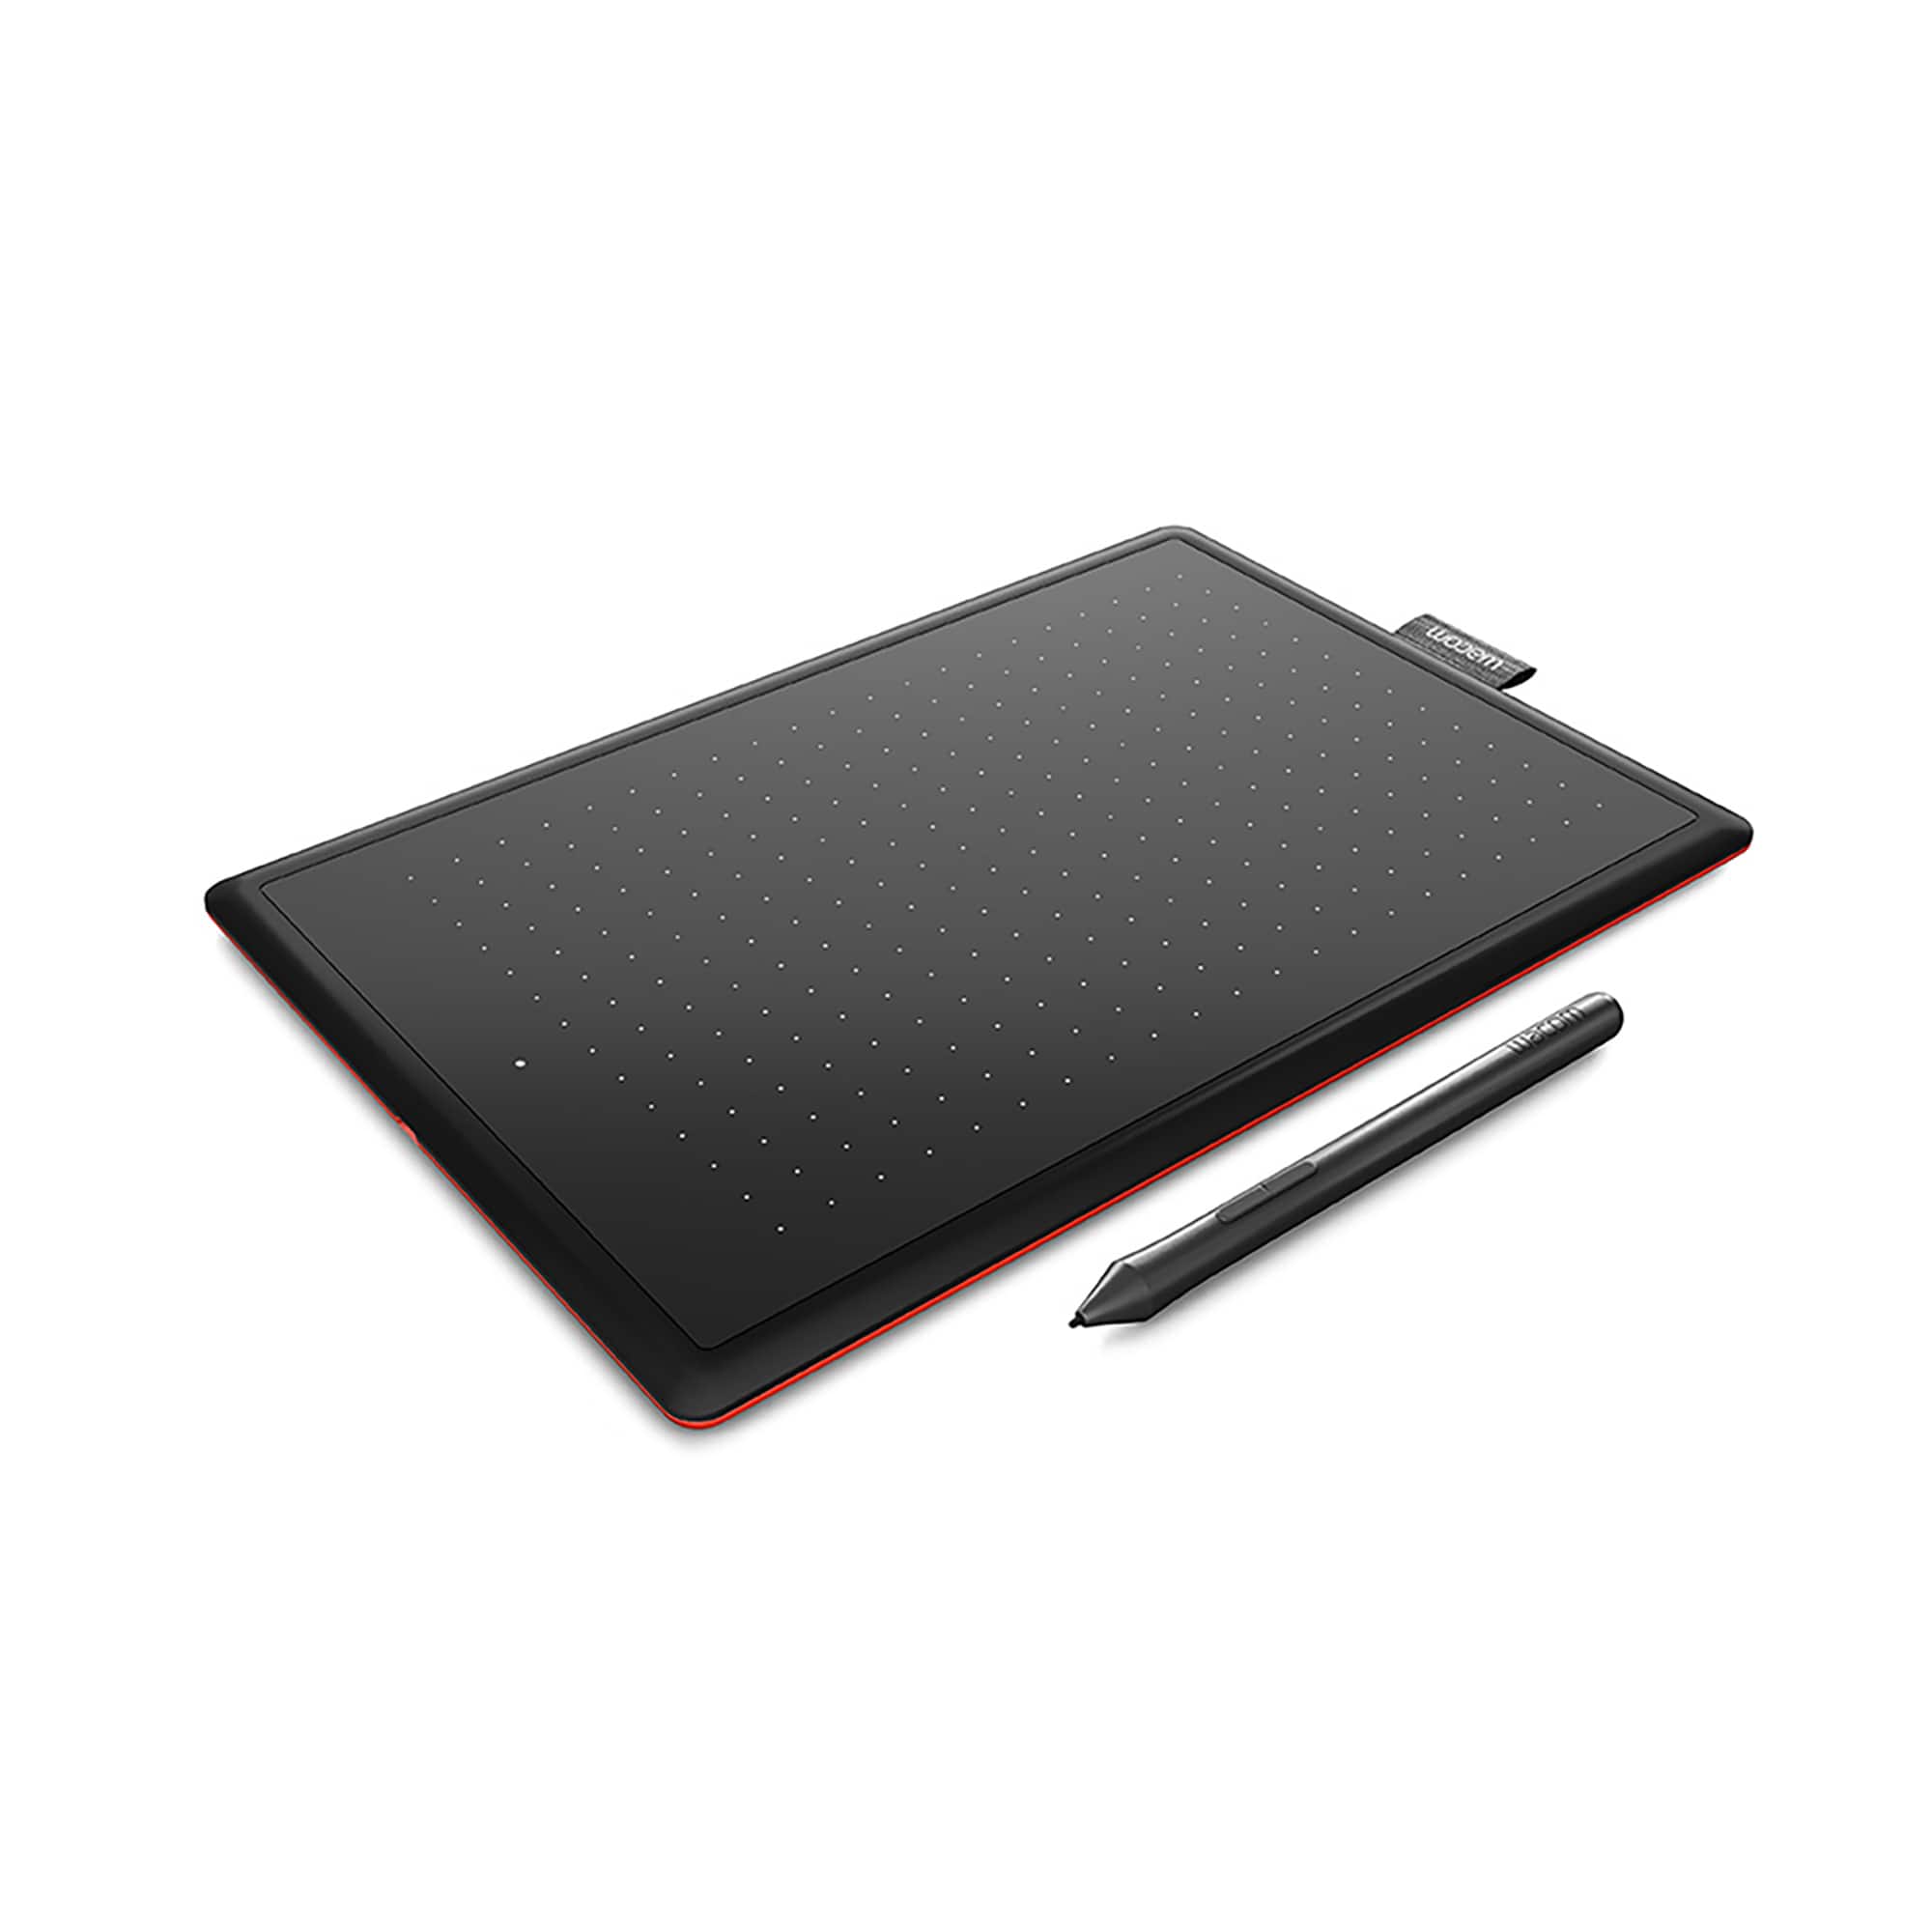 One by Wacom Small Graphics Pen Tablet